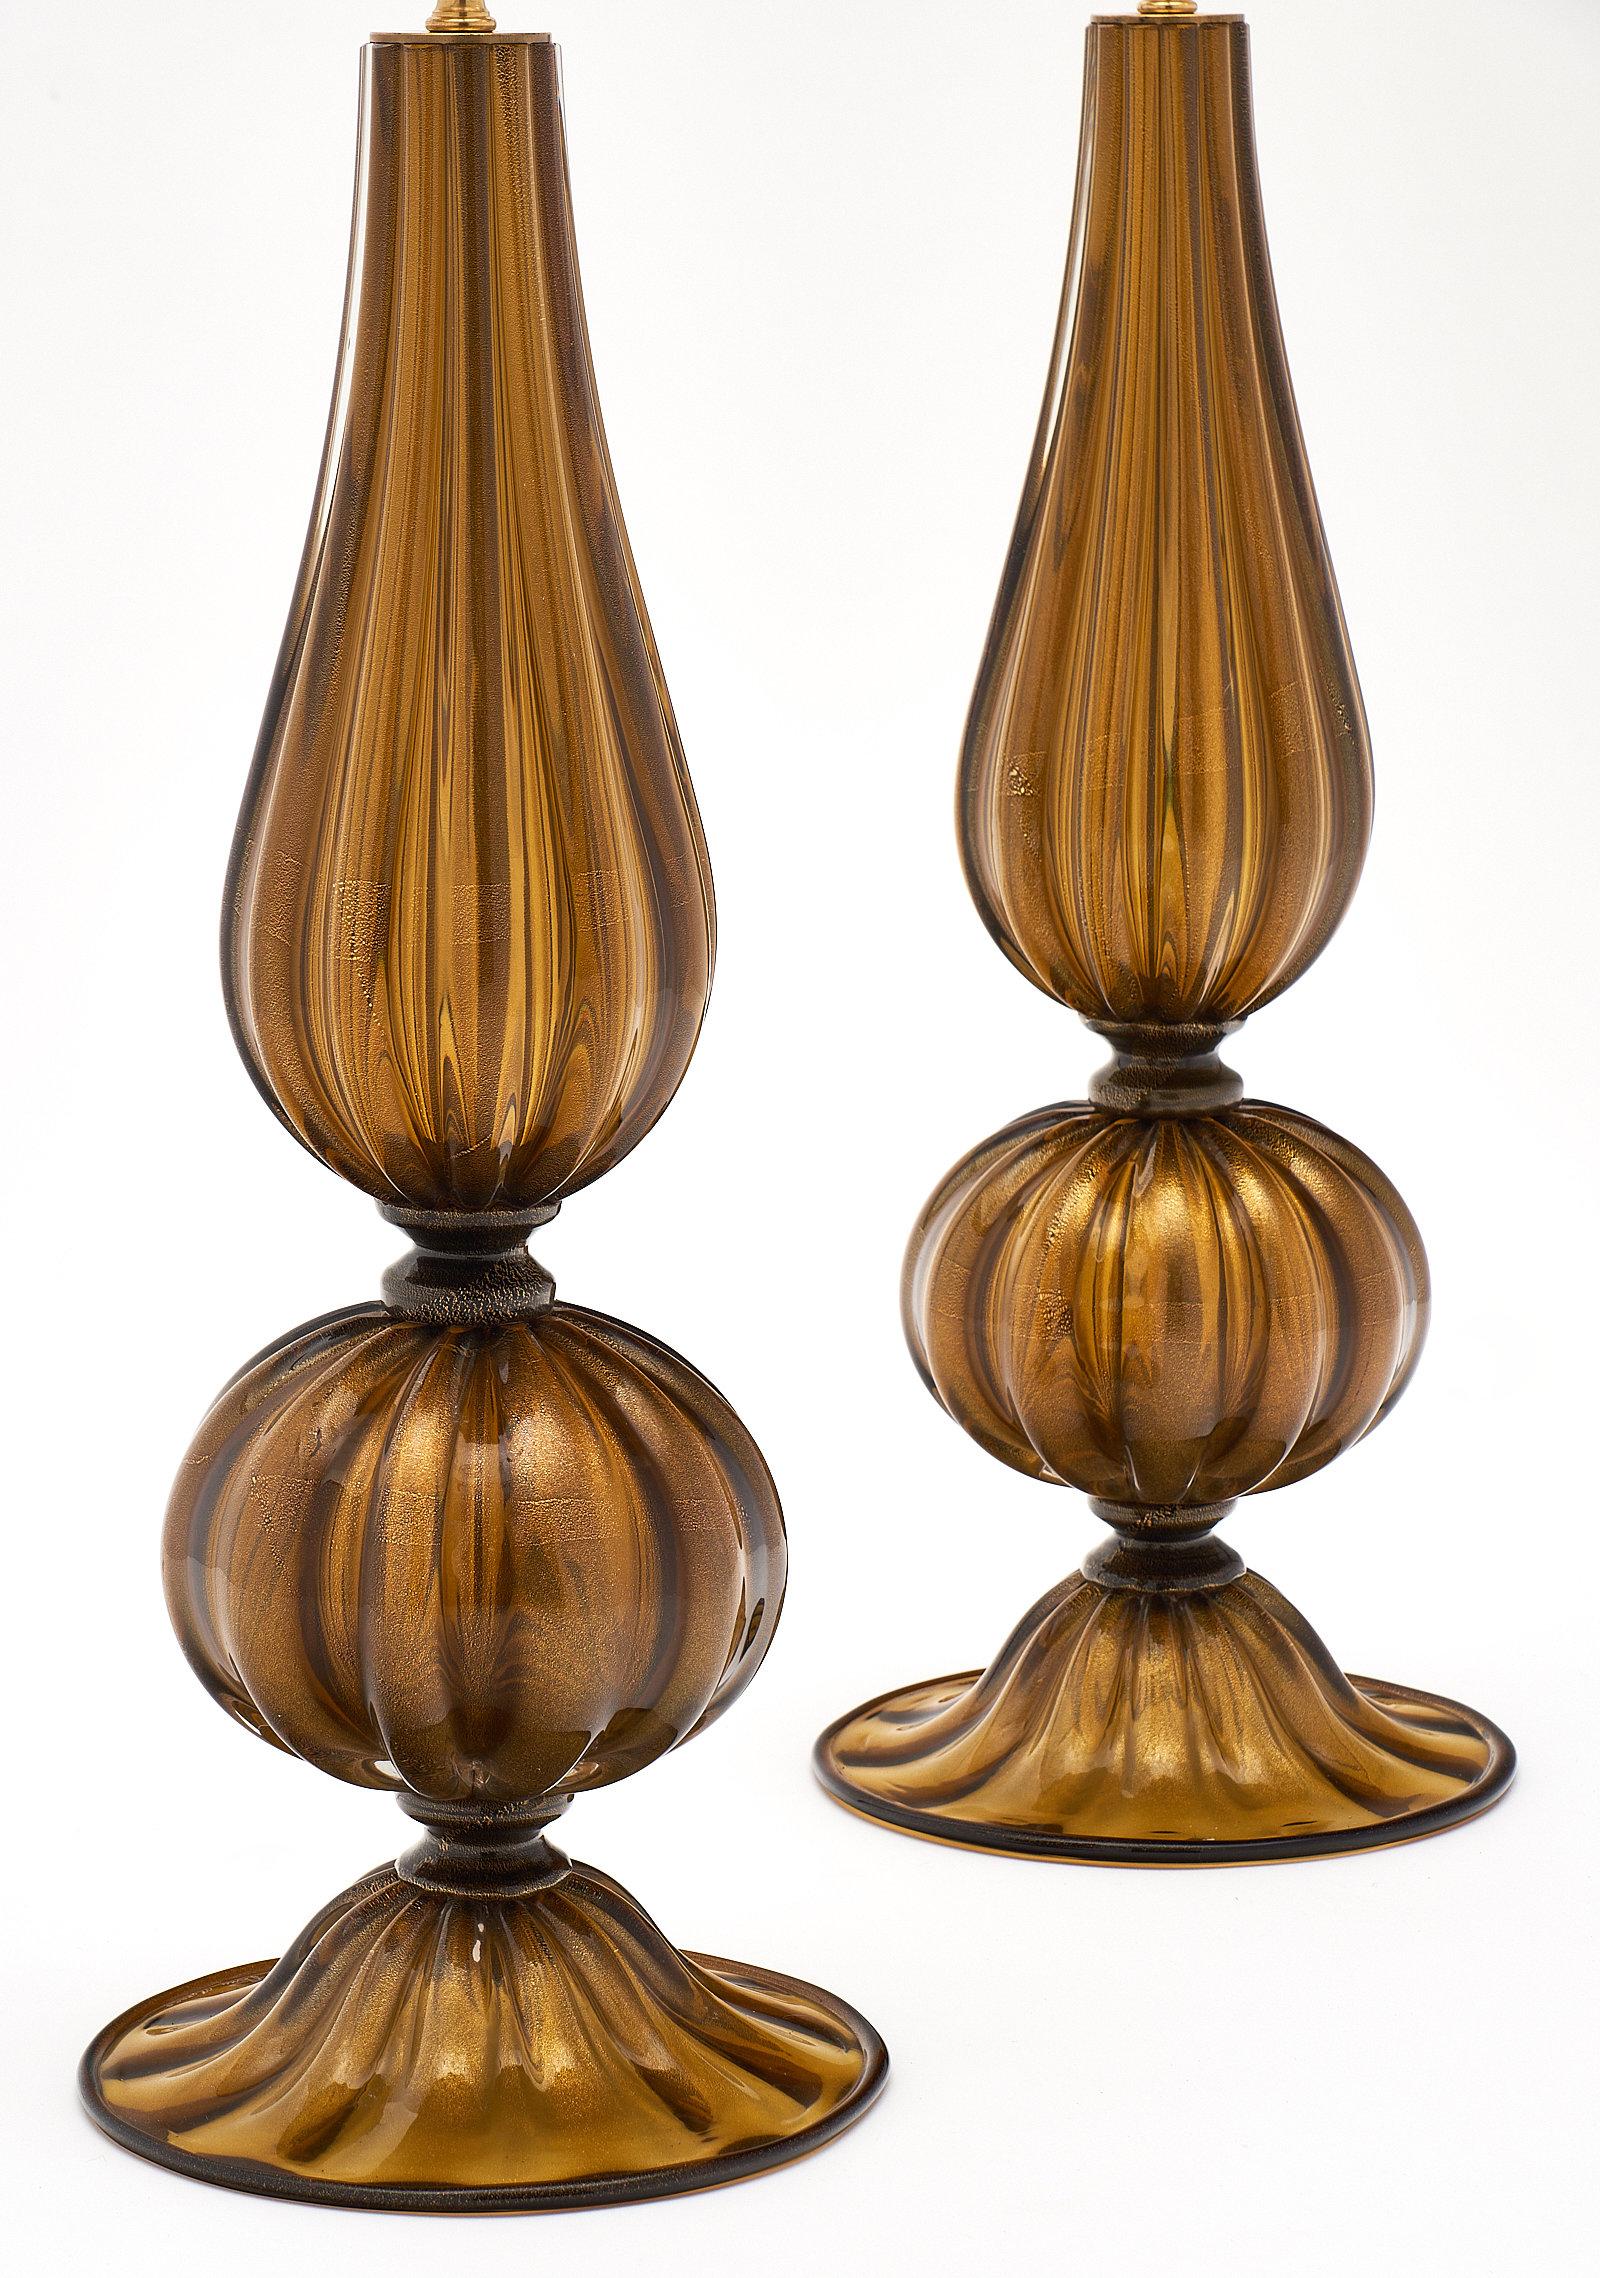 A fine pair of Murano glass “Pagoda” lamps of dark amber hand blown glass. The Avventurina process was used here, adding 23-carat gold leaf in the fusion process to create a timeless shimmering effect. This pair has been newly wired to fit US